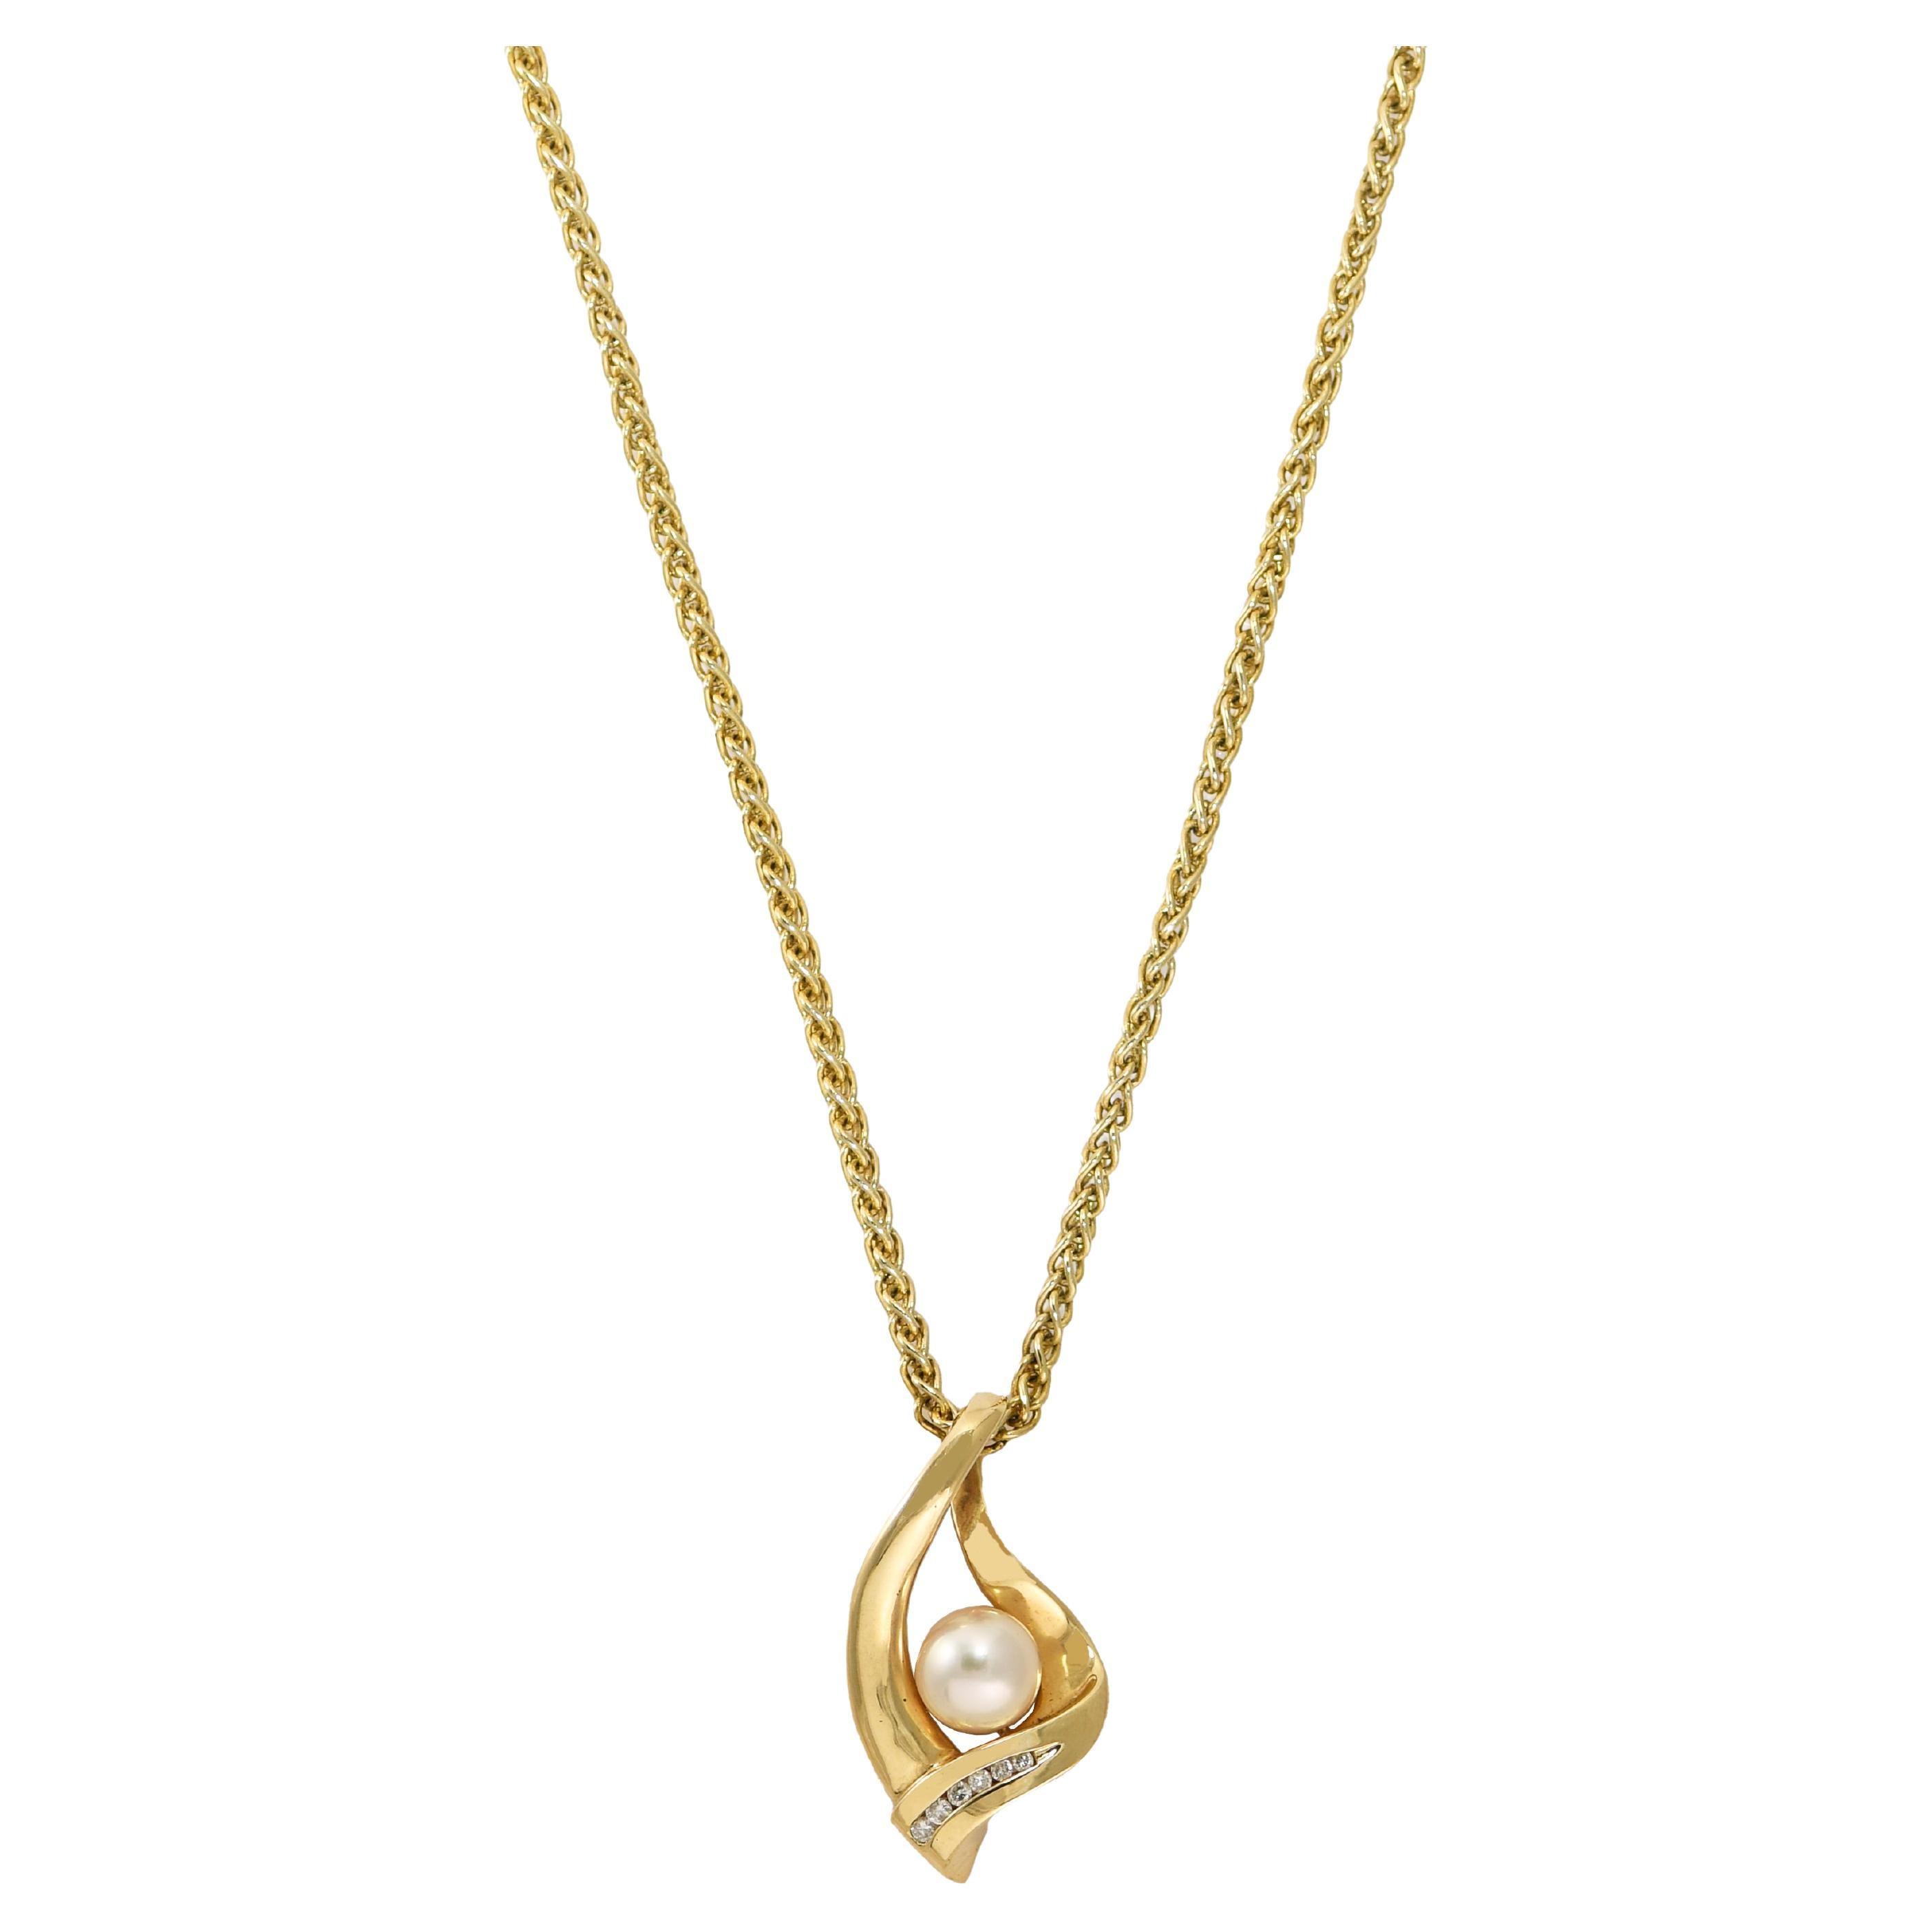 14K Yellow Gold Diamond and Pearl Necklace